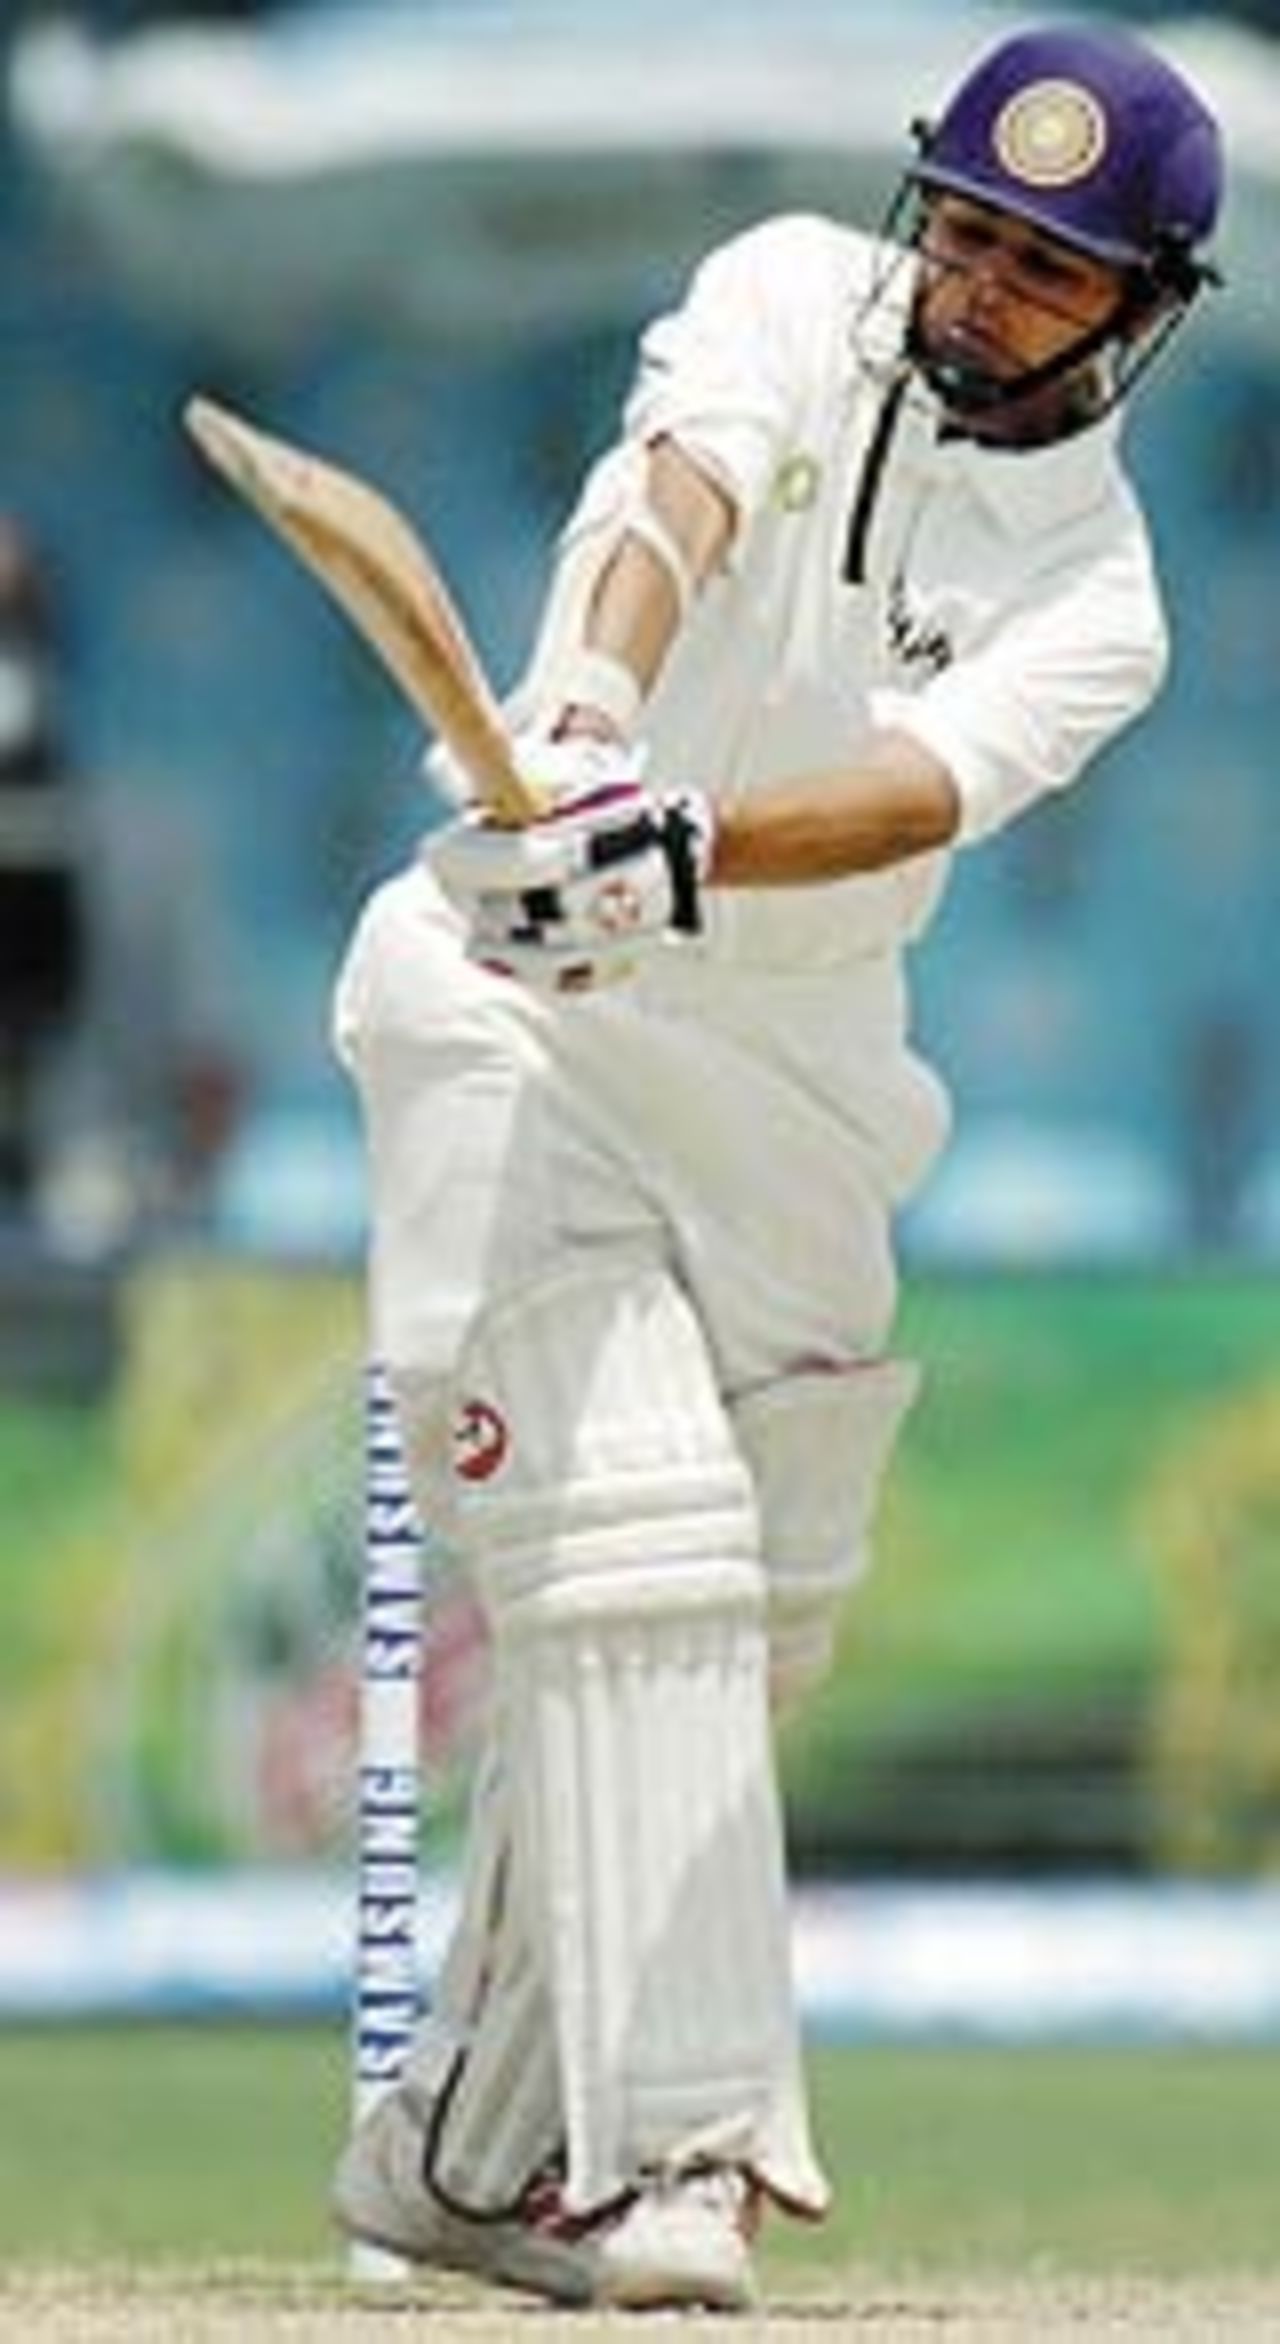 Parthiv Patel clips Shoaib Akhtar for a boundary, Pakistan v India, 2nd Test, Lahore, 4th day, April 8, 2004